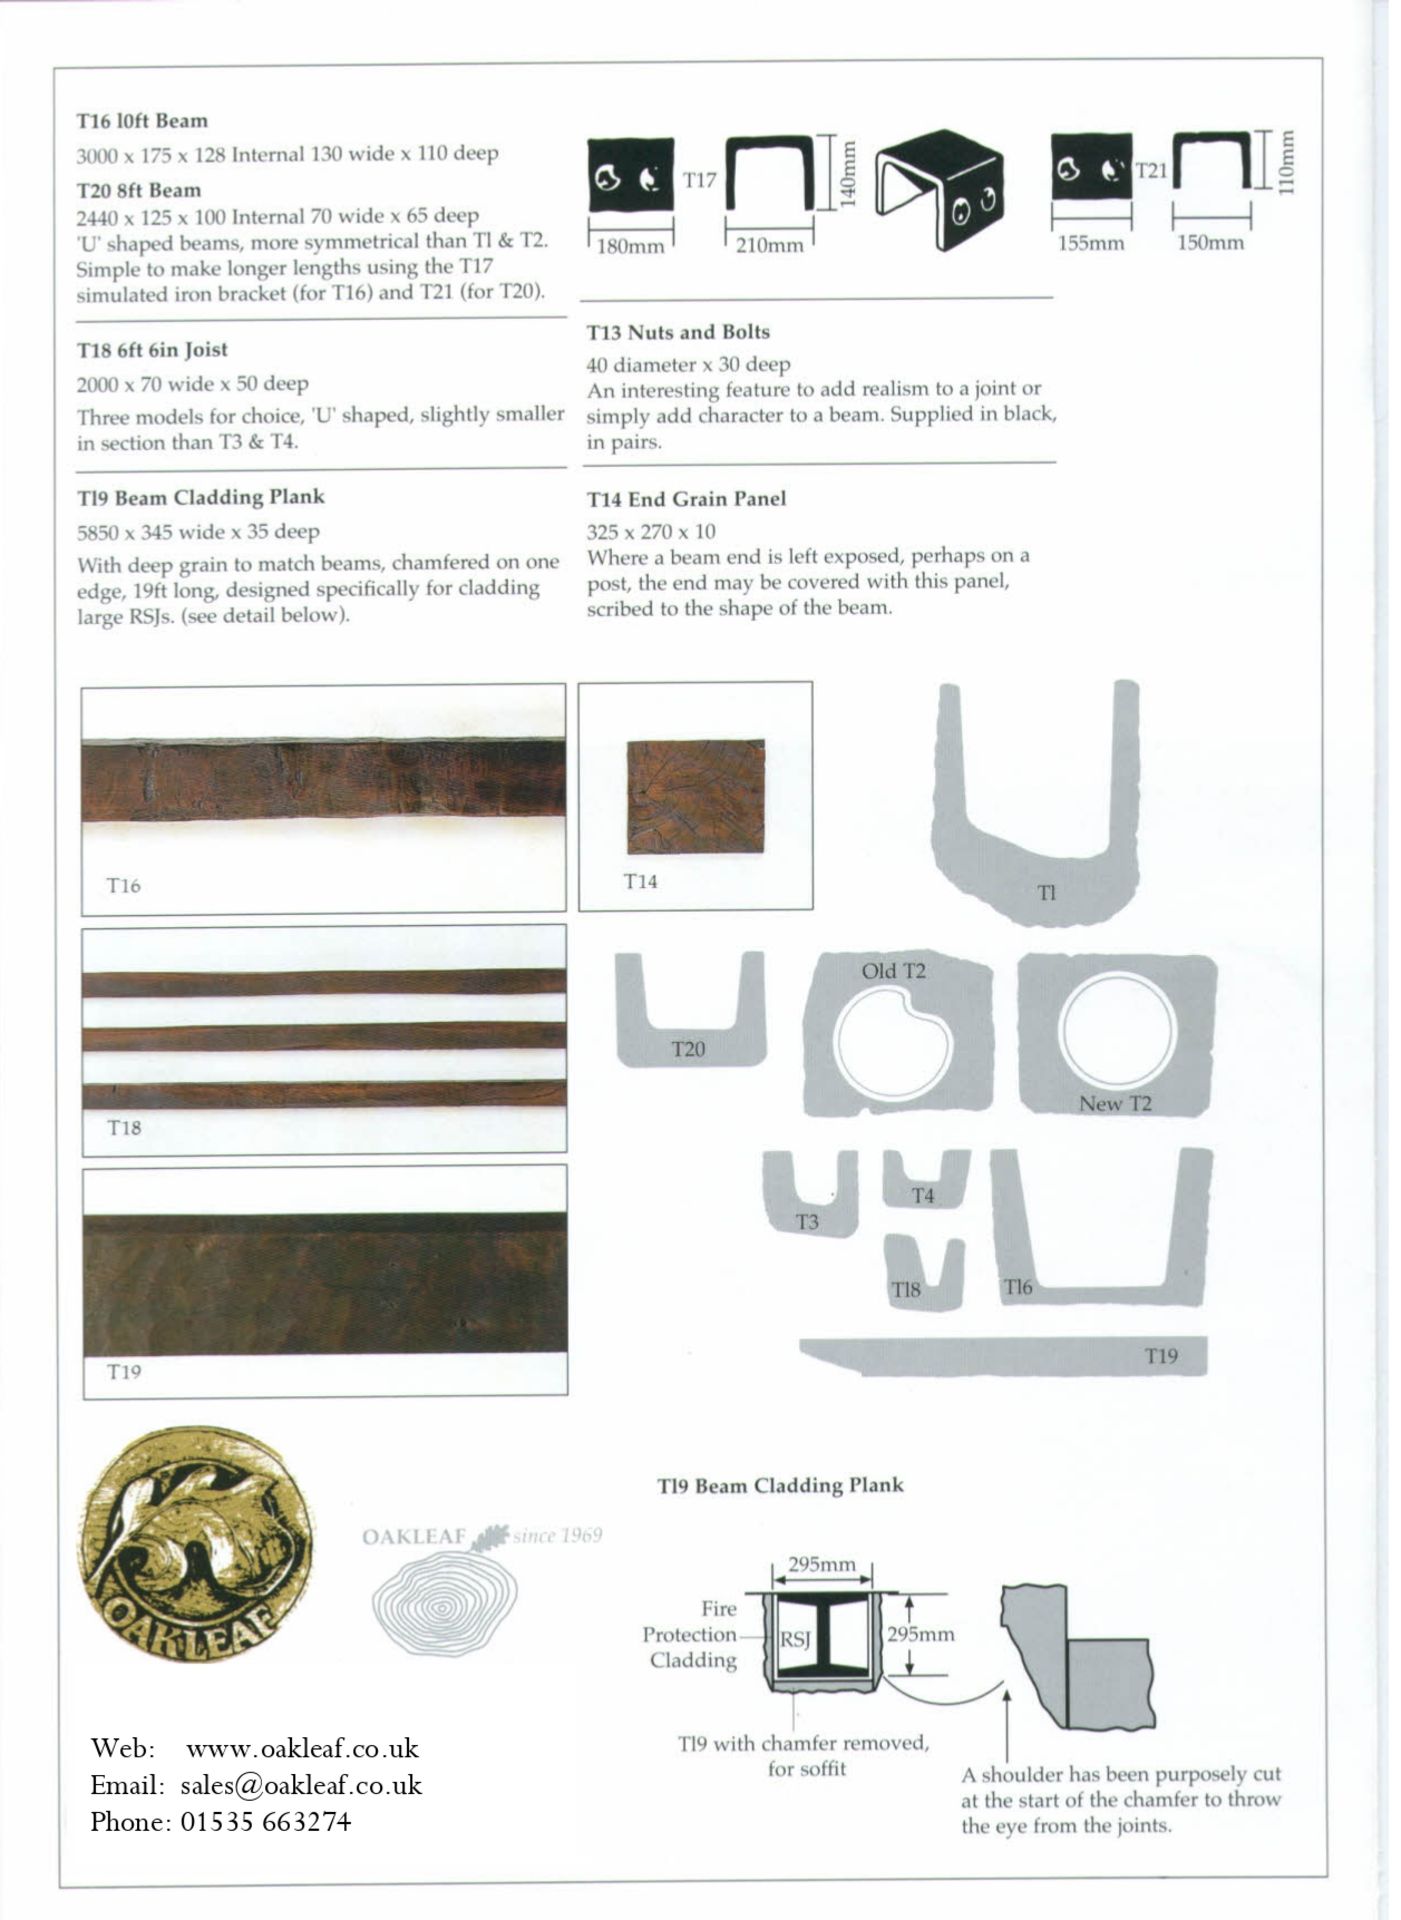 Rough-Hewn & adzed oak timbers, accs, moulds & master moulds (if available) for ceilings & walls - Bild 7 aus 7